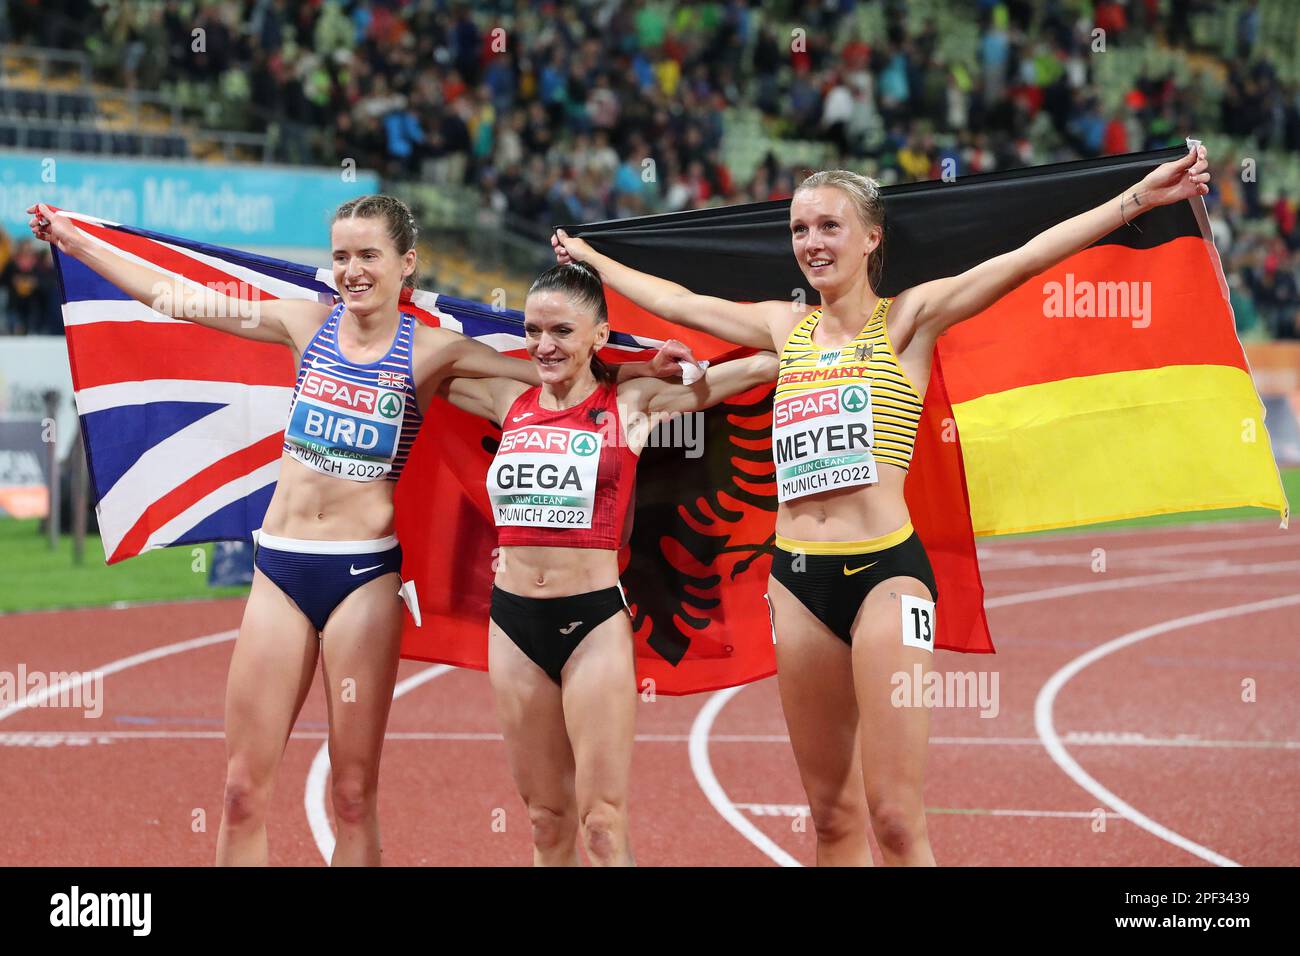 Luiza GEGA, Lea MEYER & Elizabeth BIRD celebrating after winning the Medals in the 3000m Steeplechase at the European Athletics Championship 2022 Stock Photo